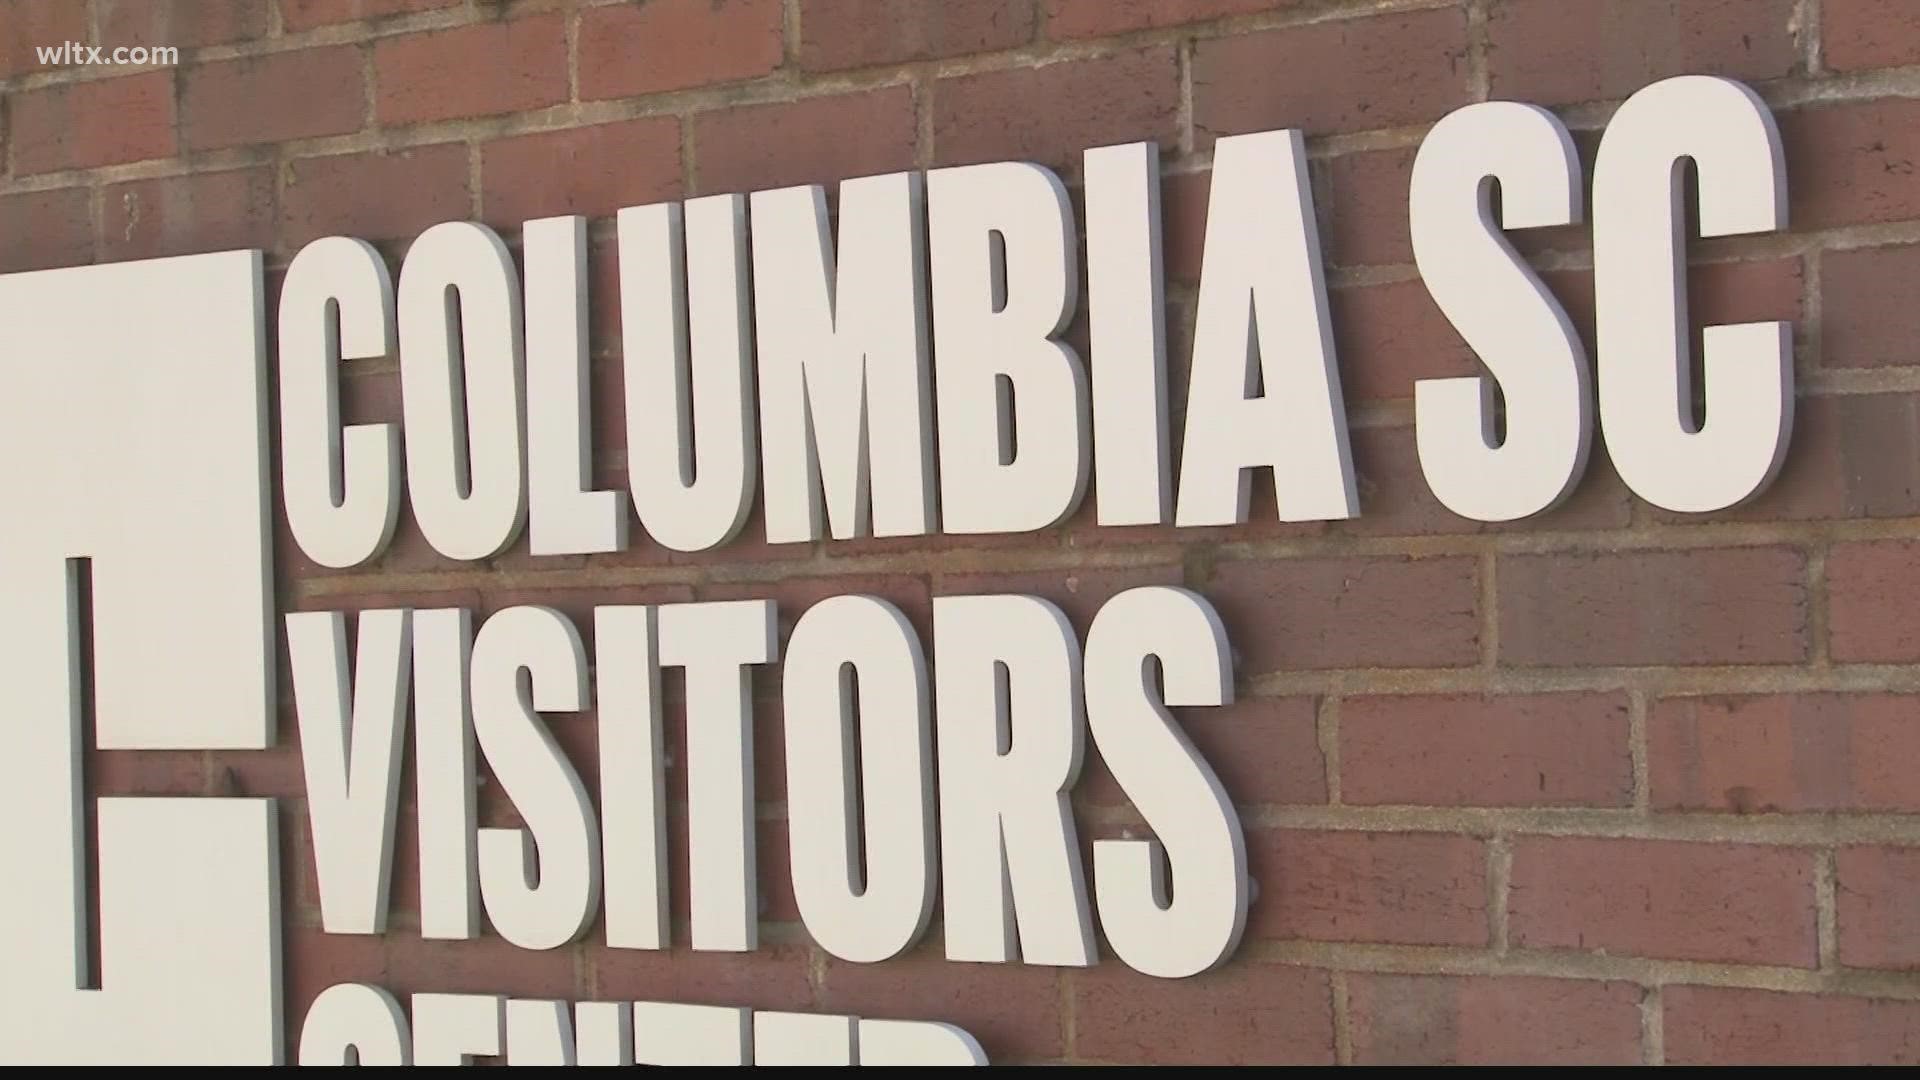 The general manager of a downtown Columbia restaurant tells News19 that with the upcoming busy weekend, he's excited about the economic boost.